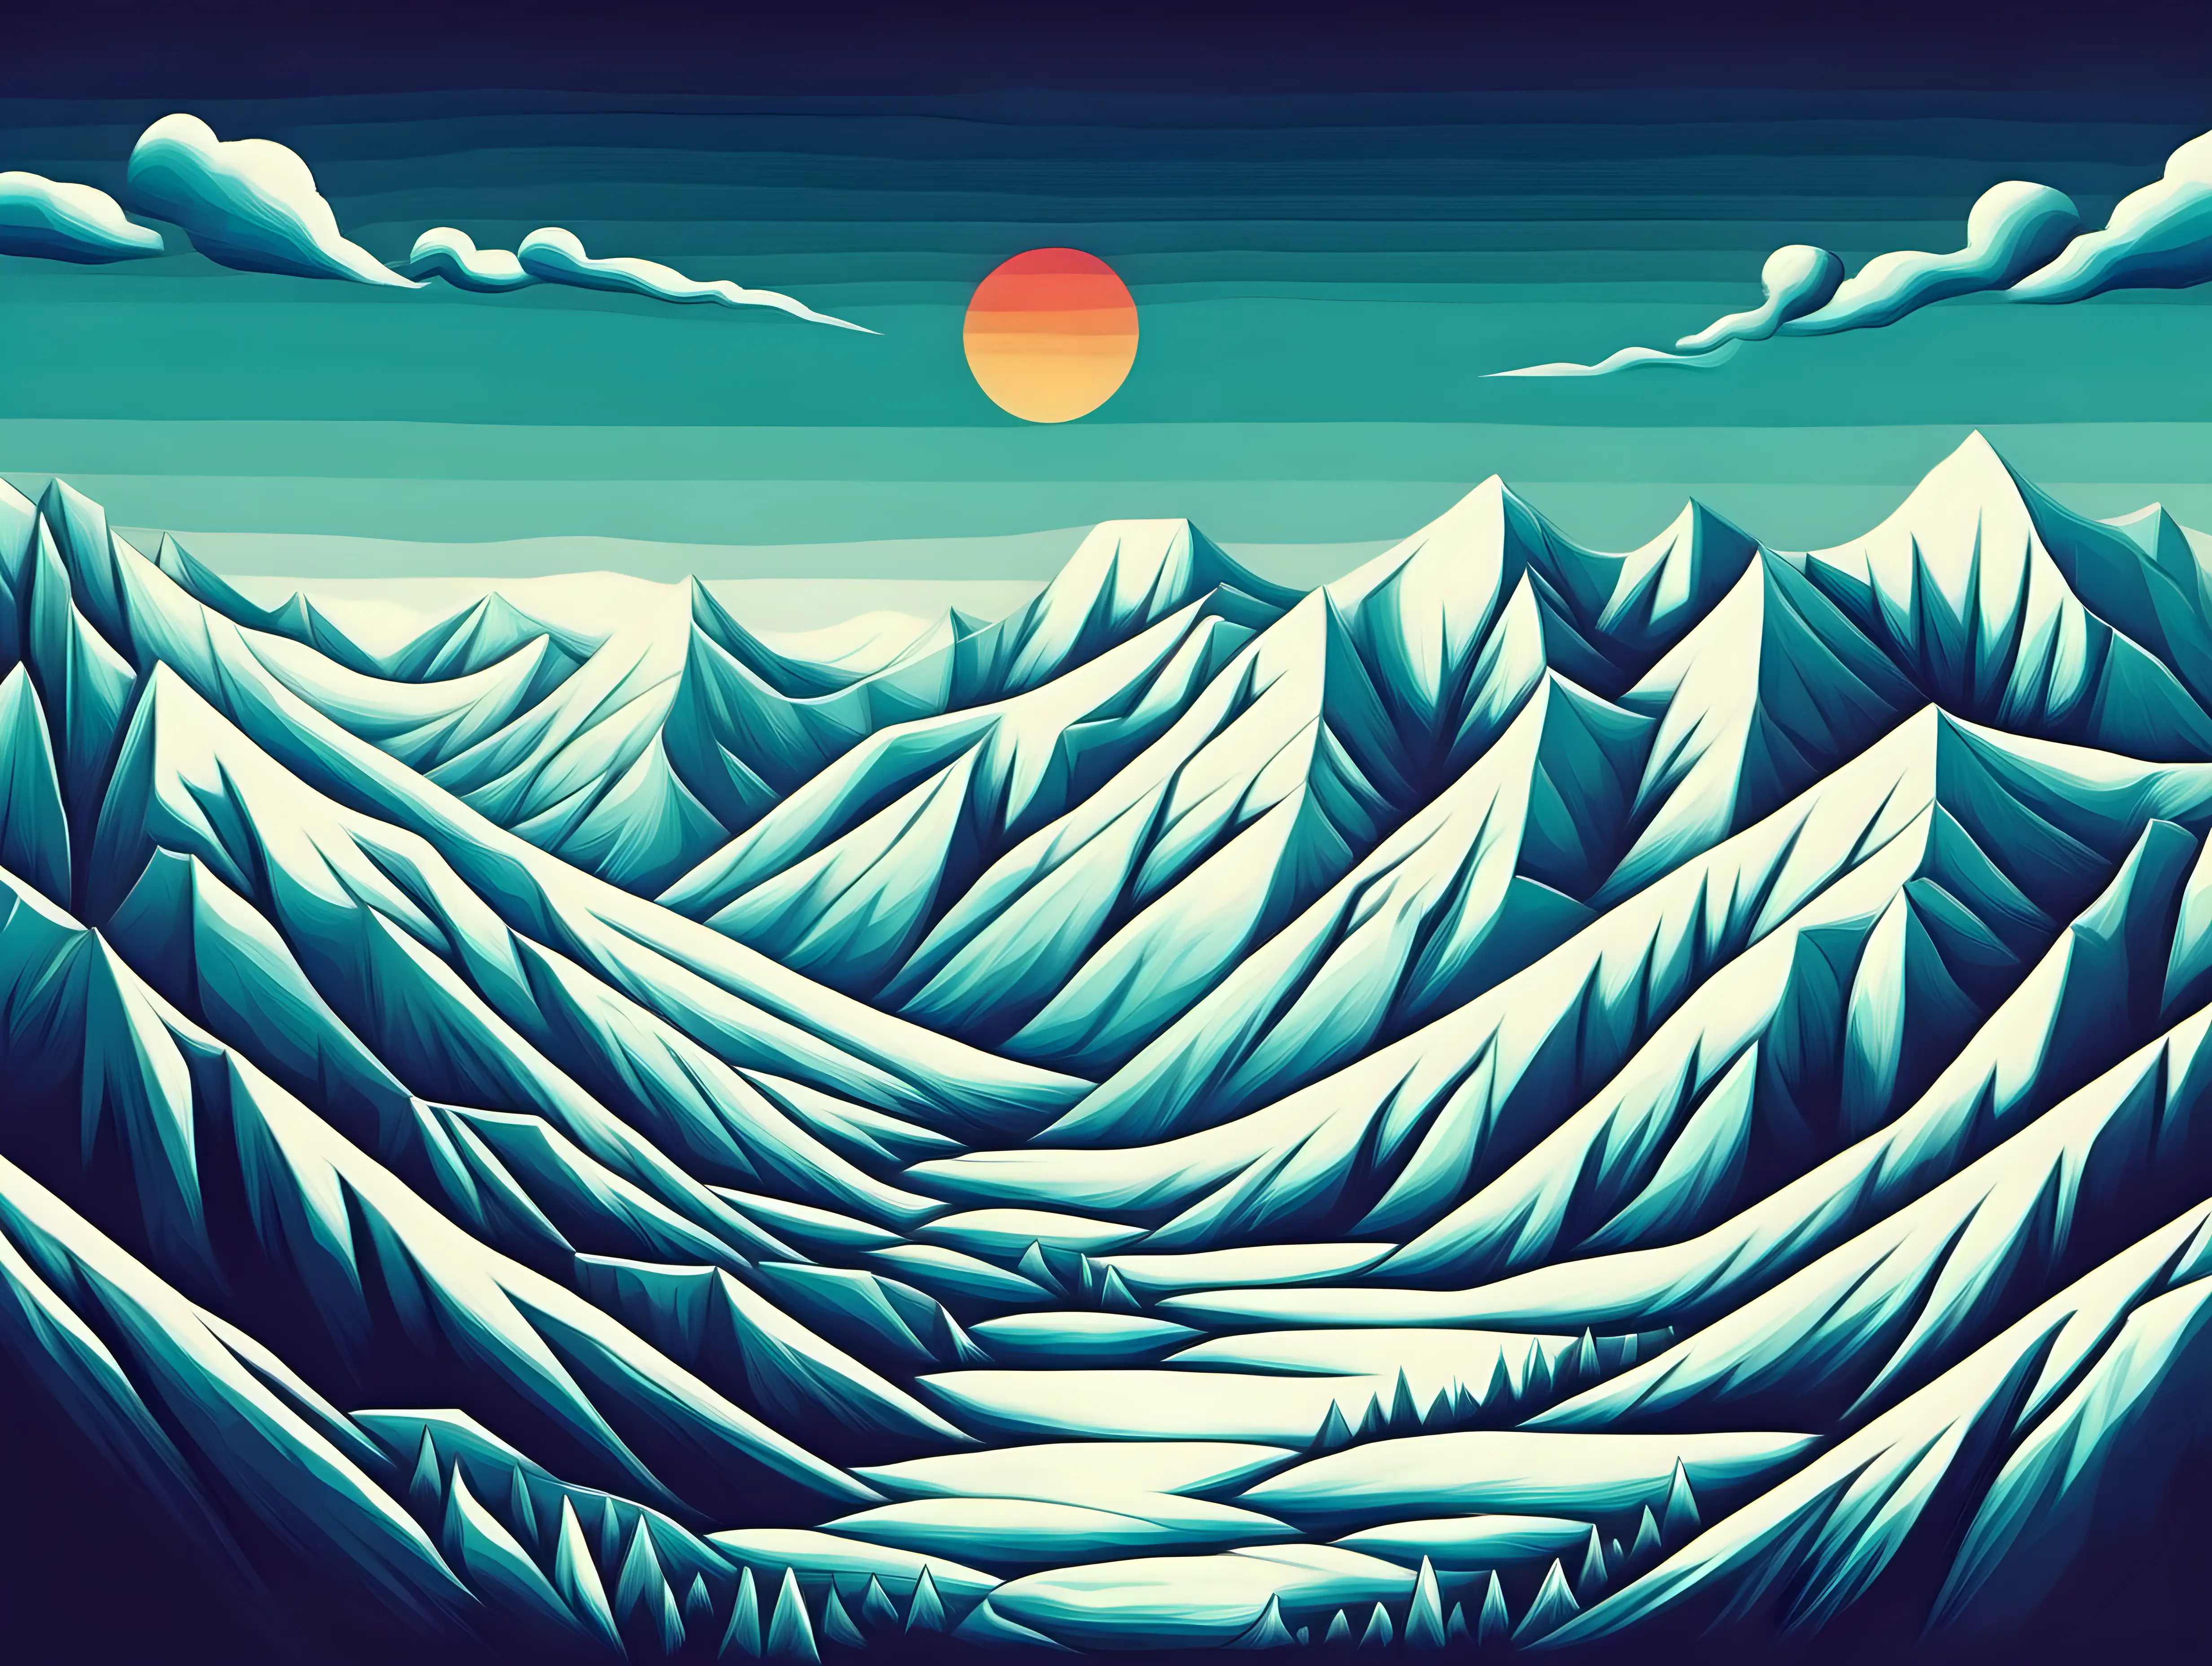 Surreal SnowCapped Mountain Dreamscape in Contemporary Art Style